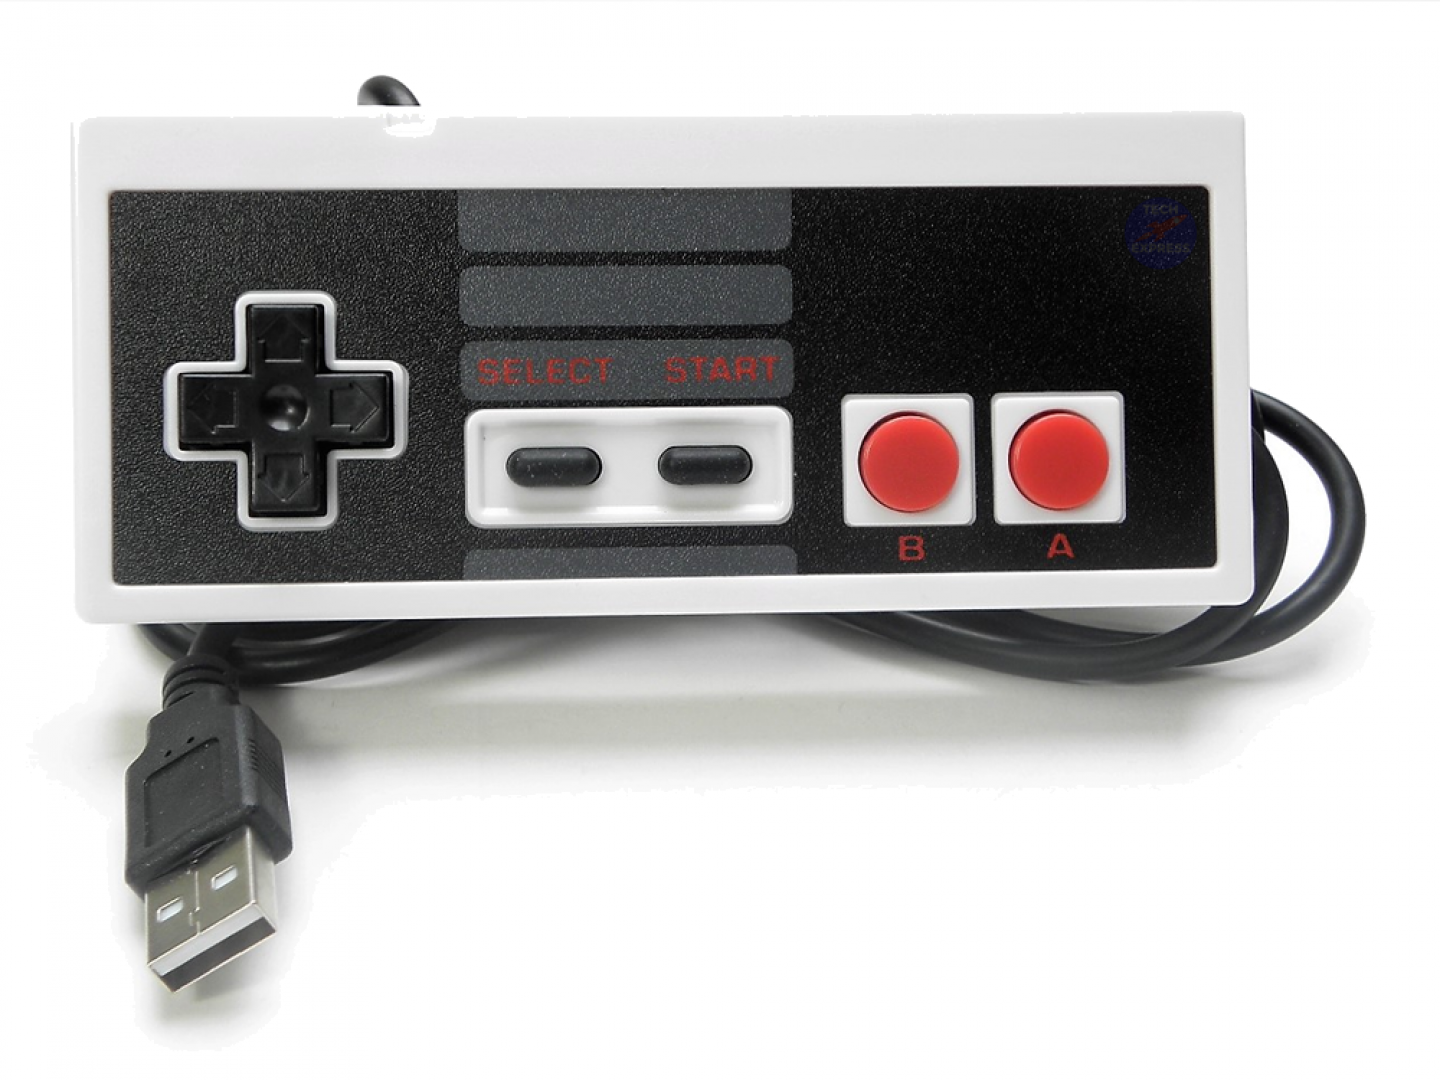 cant get raspberry pi to recognize snes usb controller